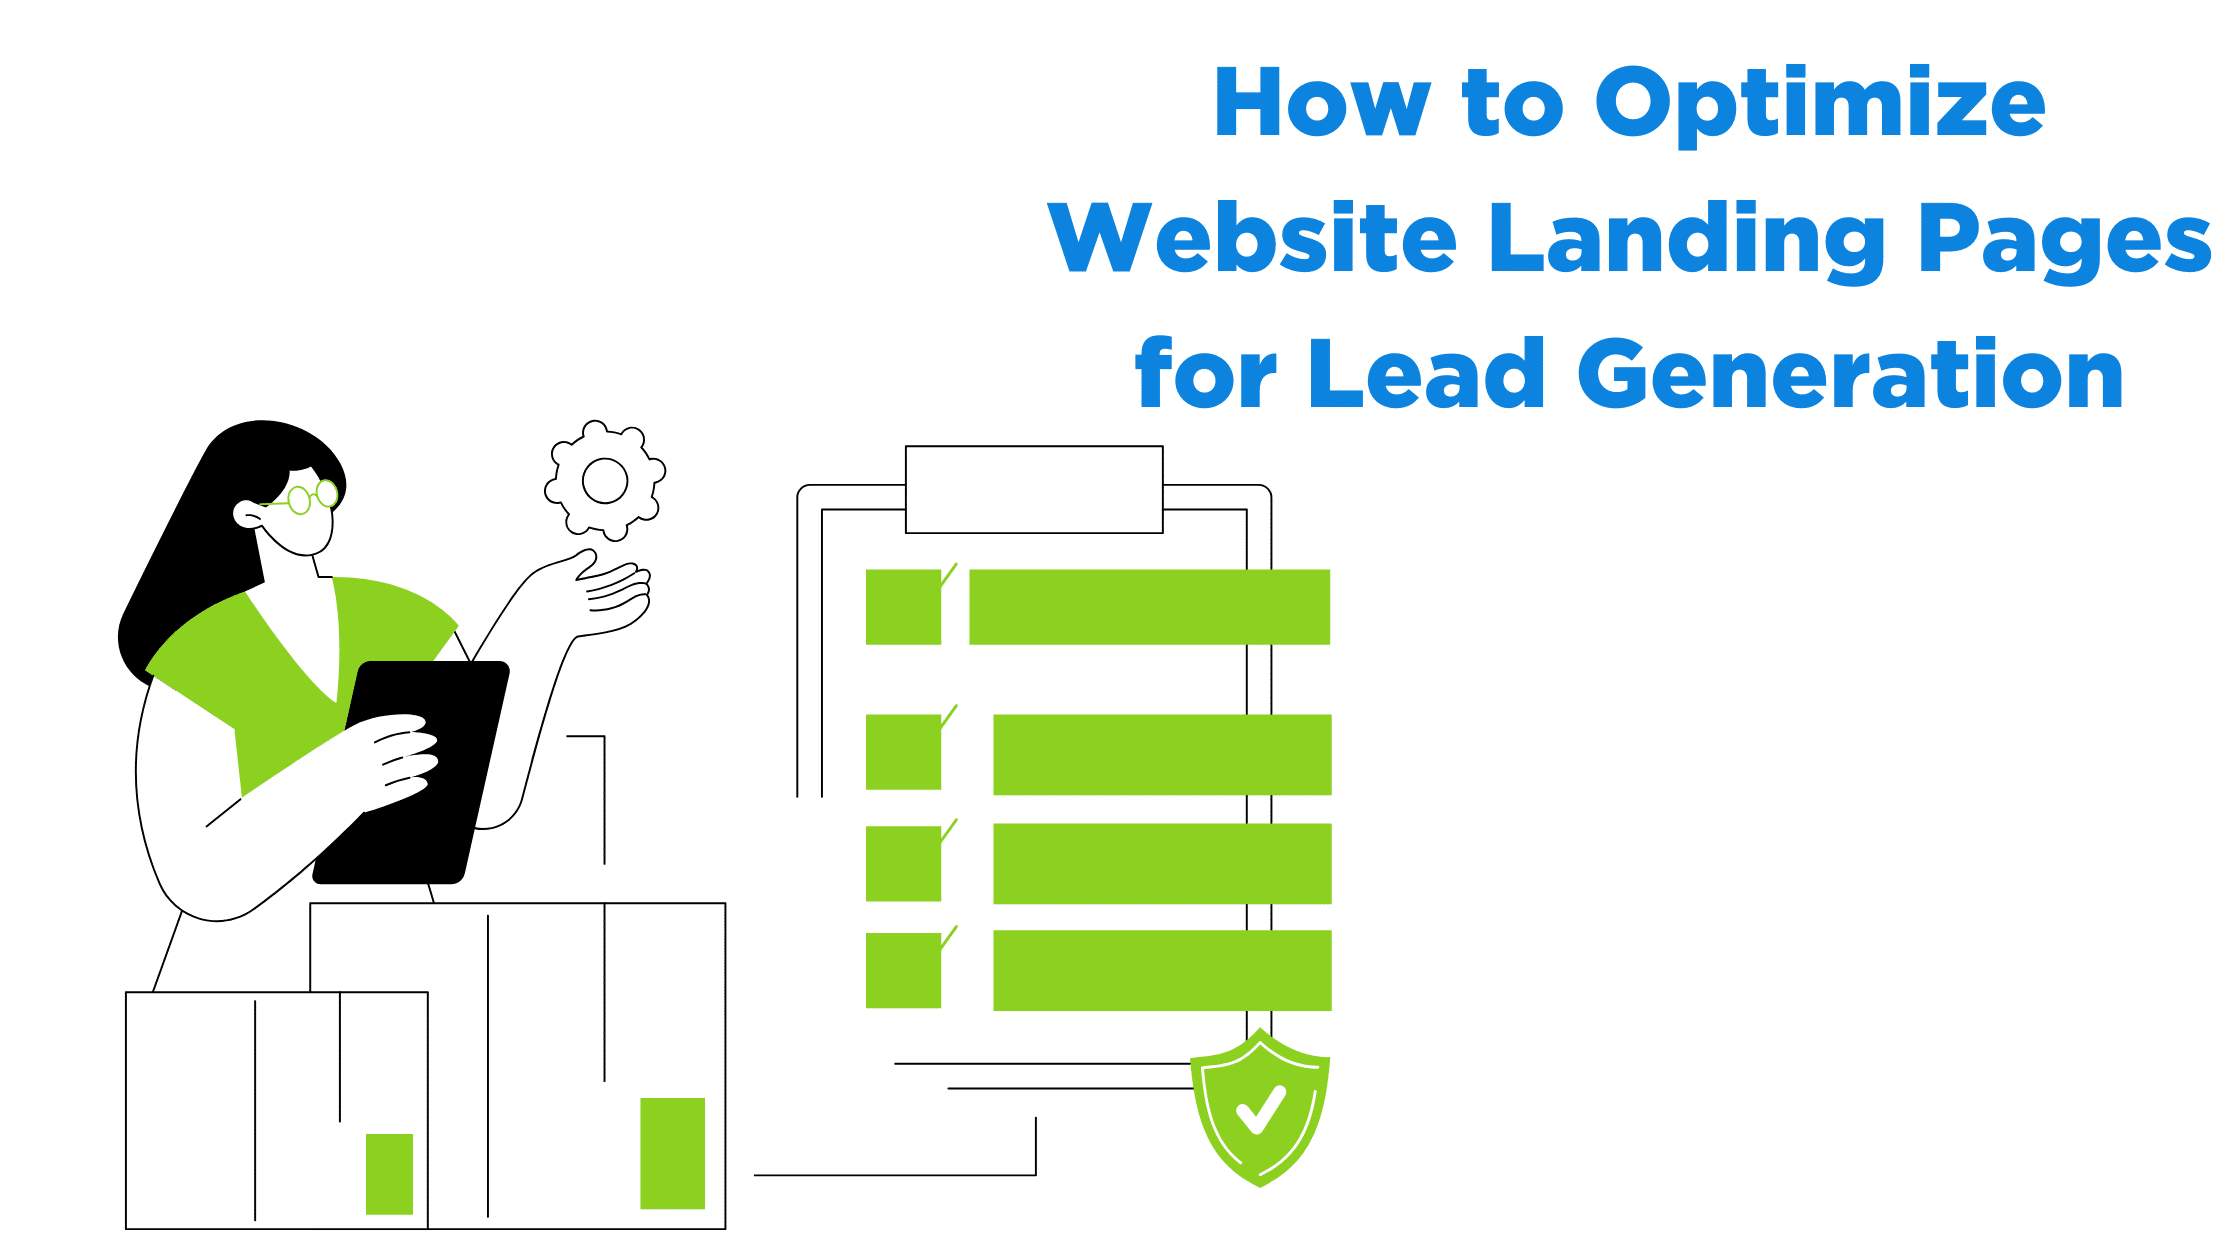 How to Optimize Website Landing Pages for Lead Generation